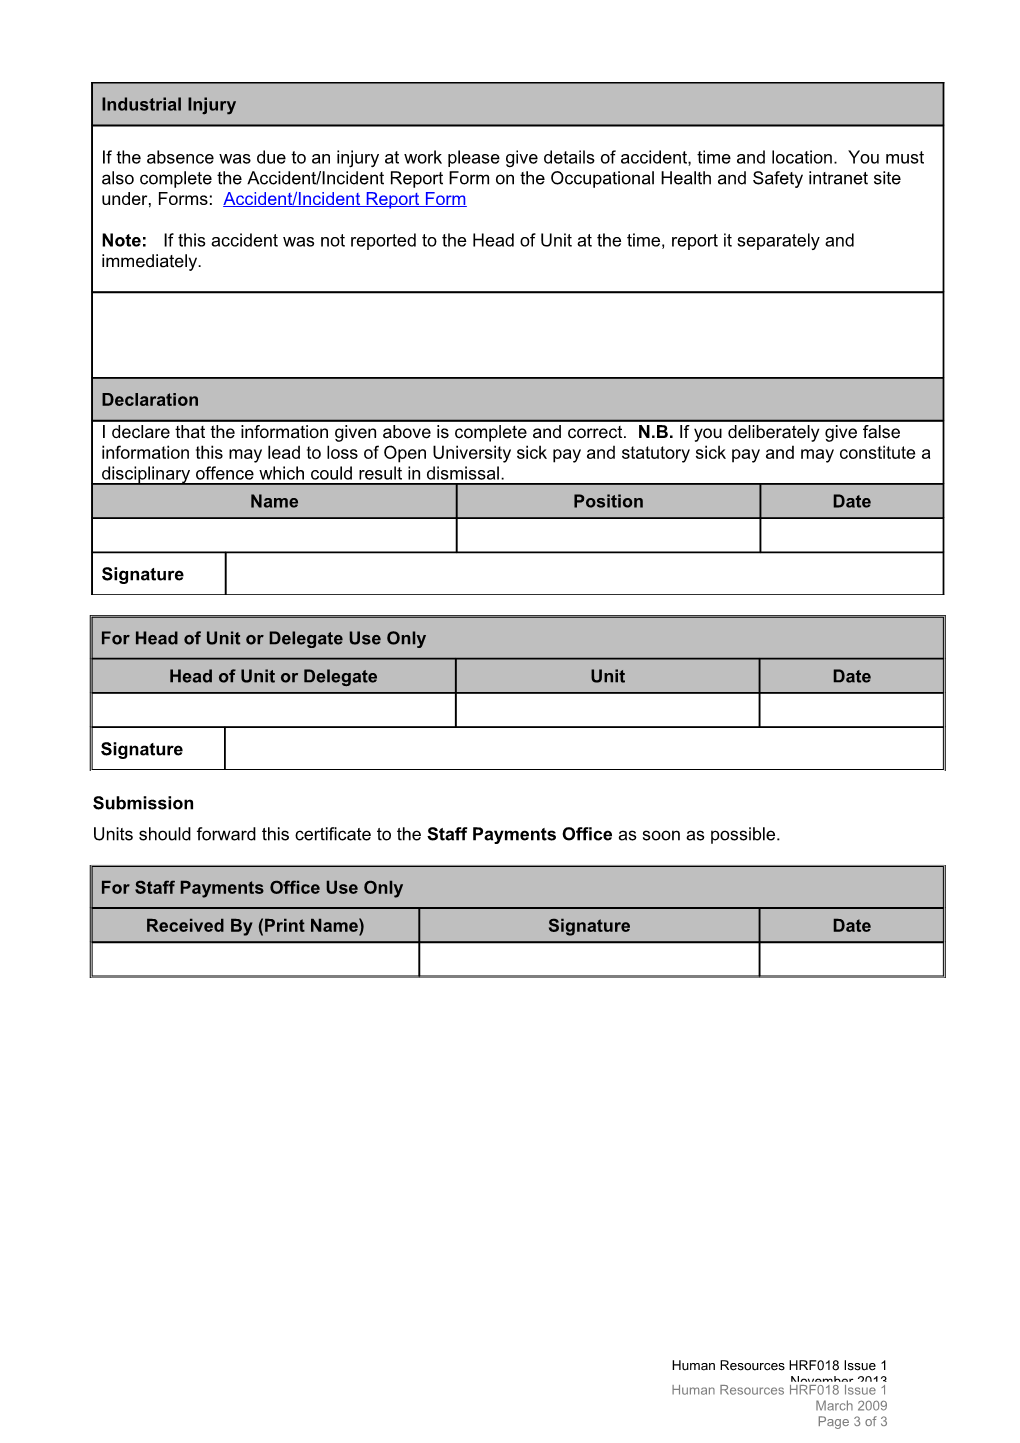 Certification of Sickness Absence Form HRF018